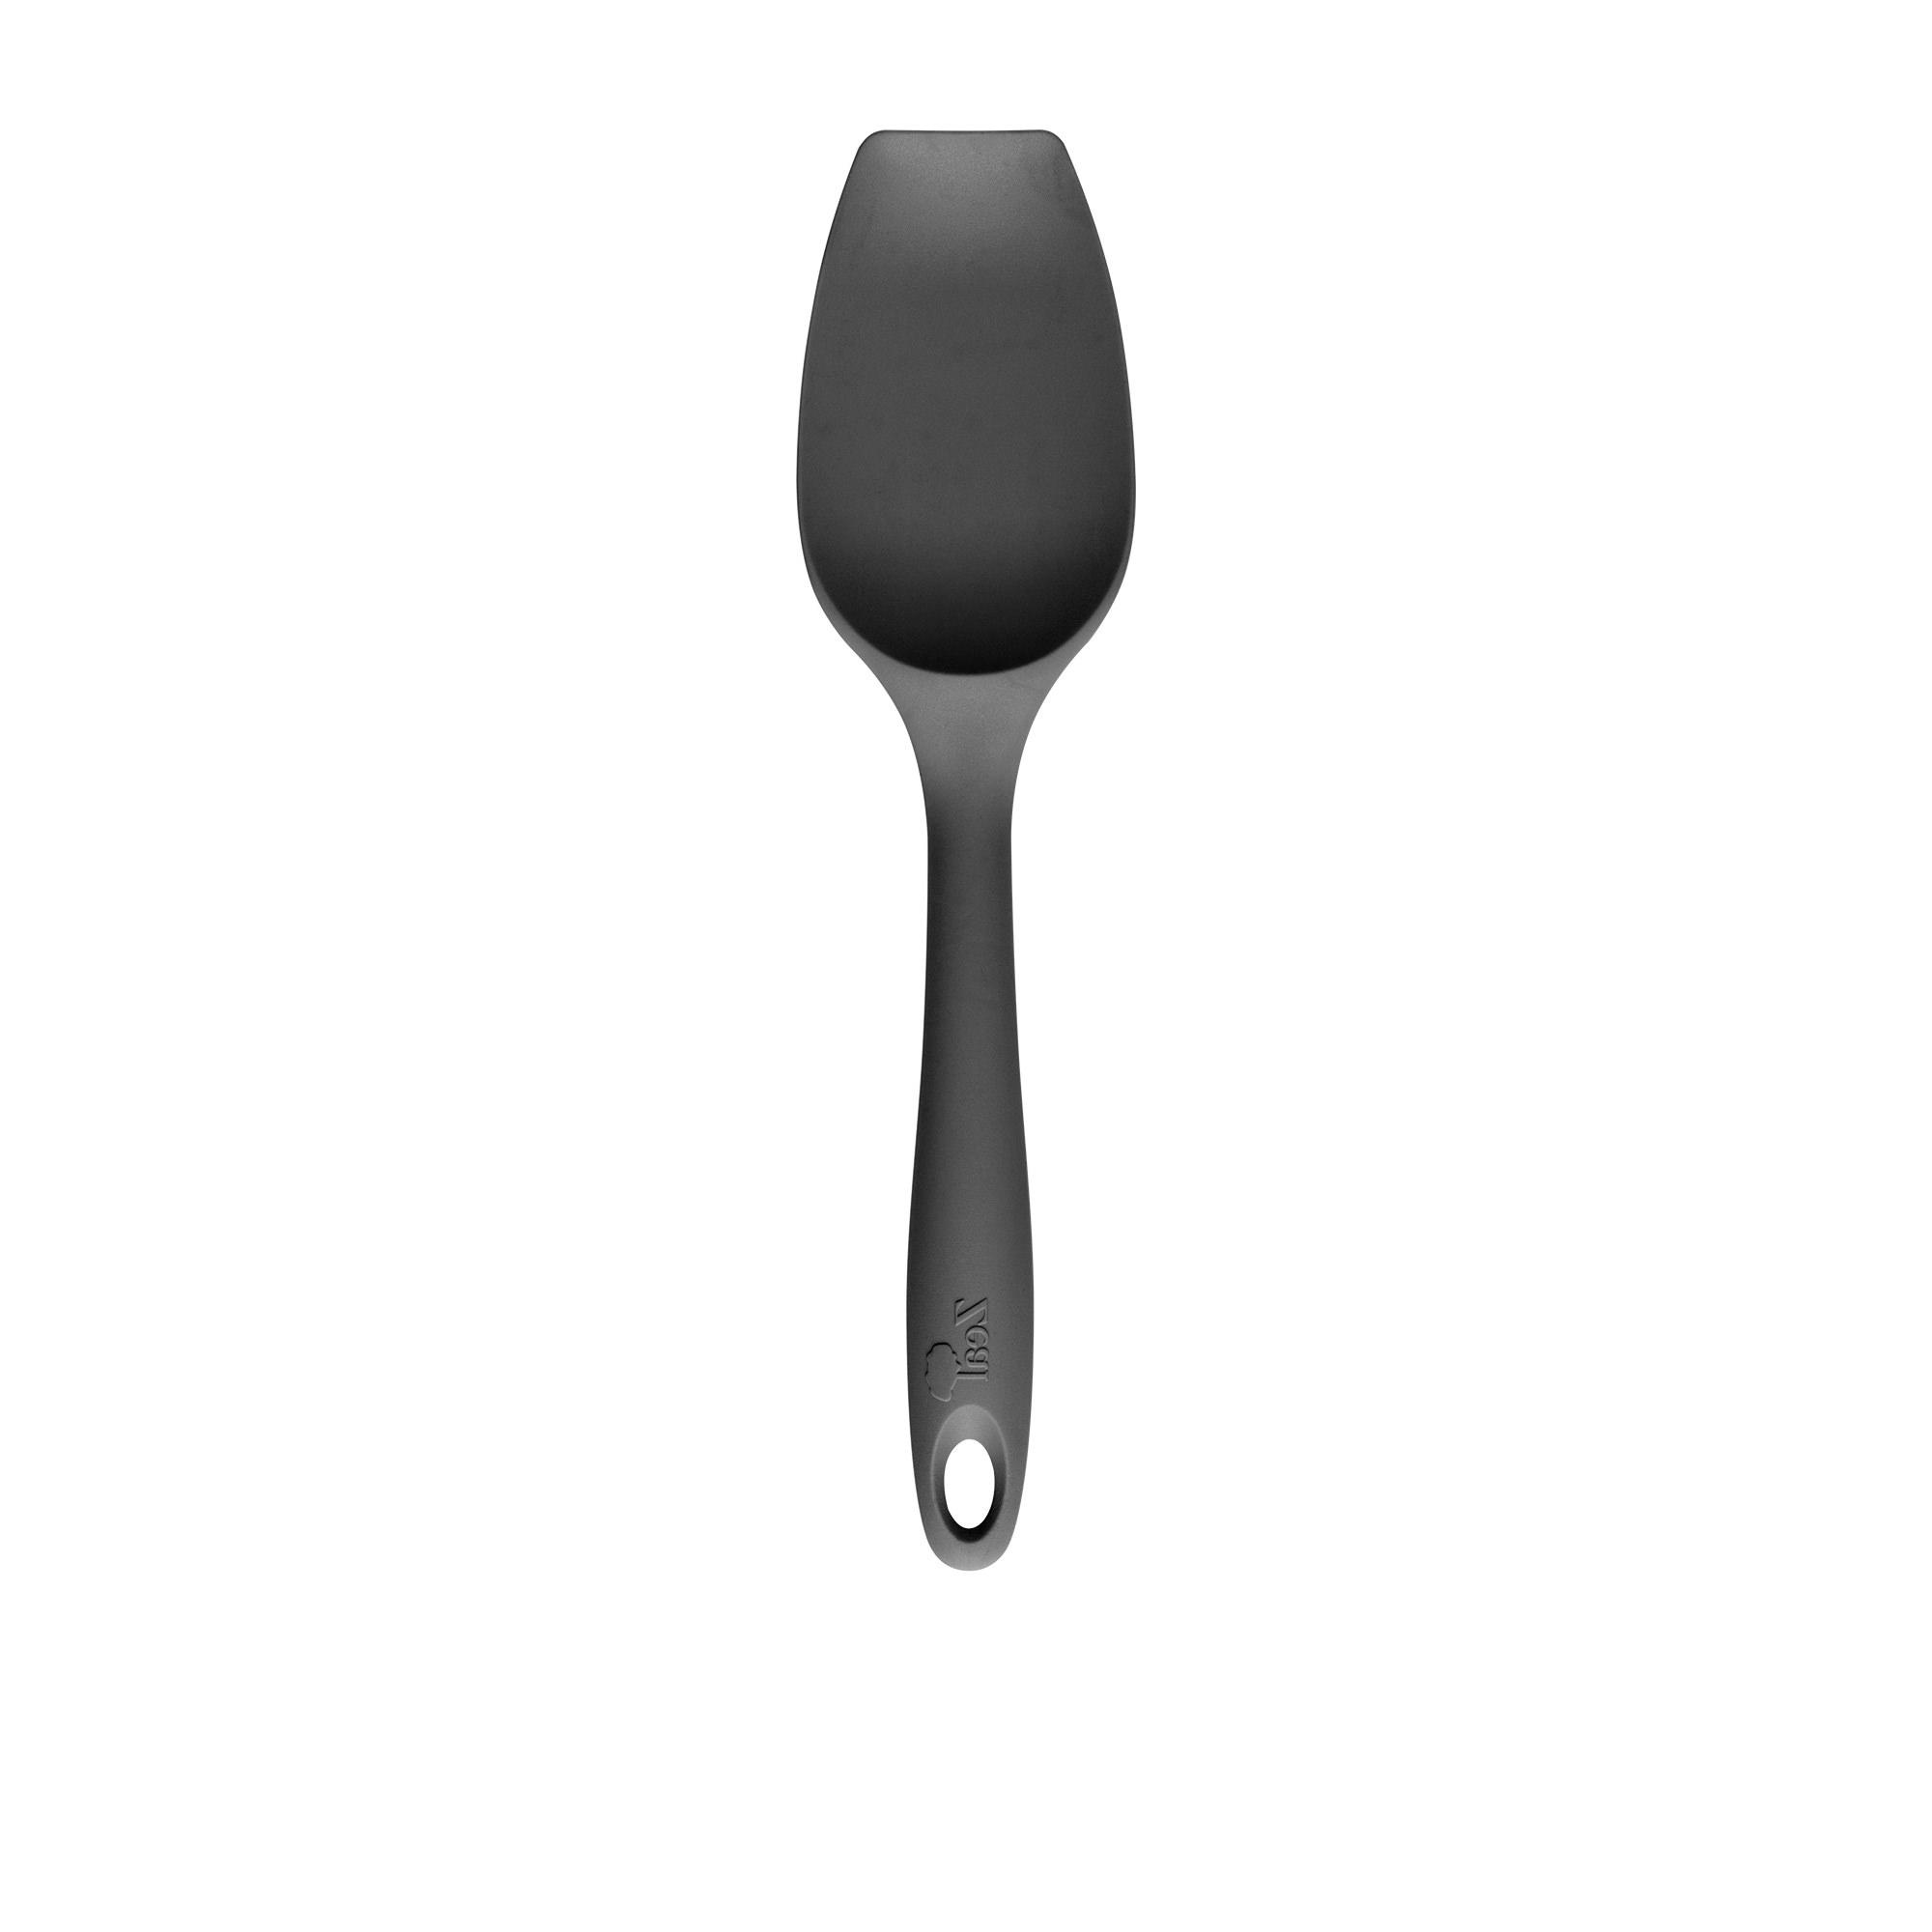 Zeal Silicone Spatula Spoon Charcoal Image 1